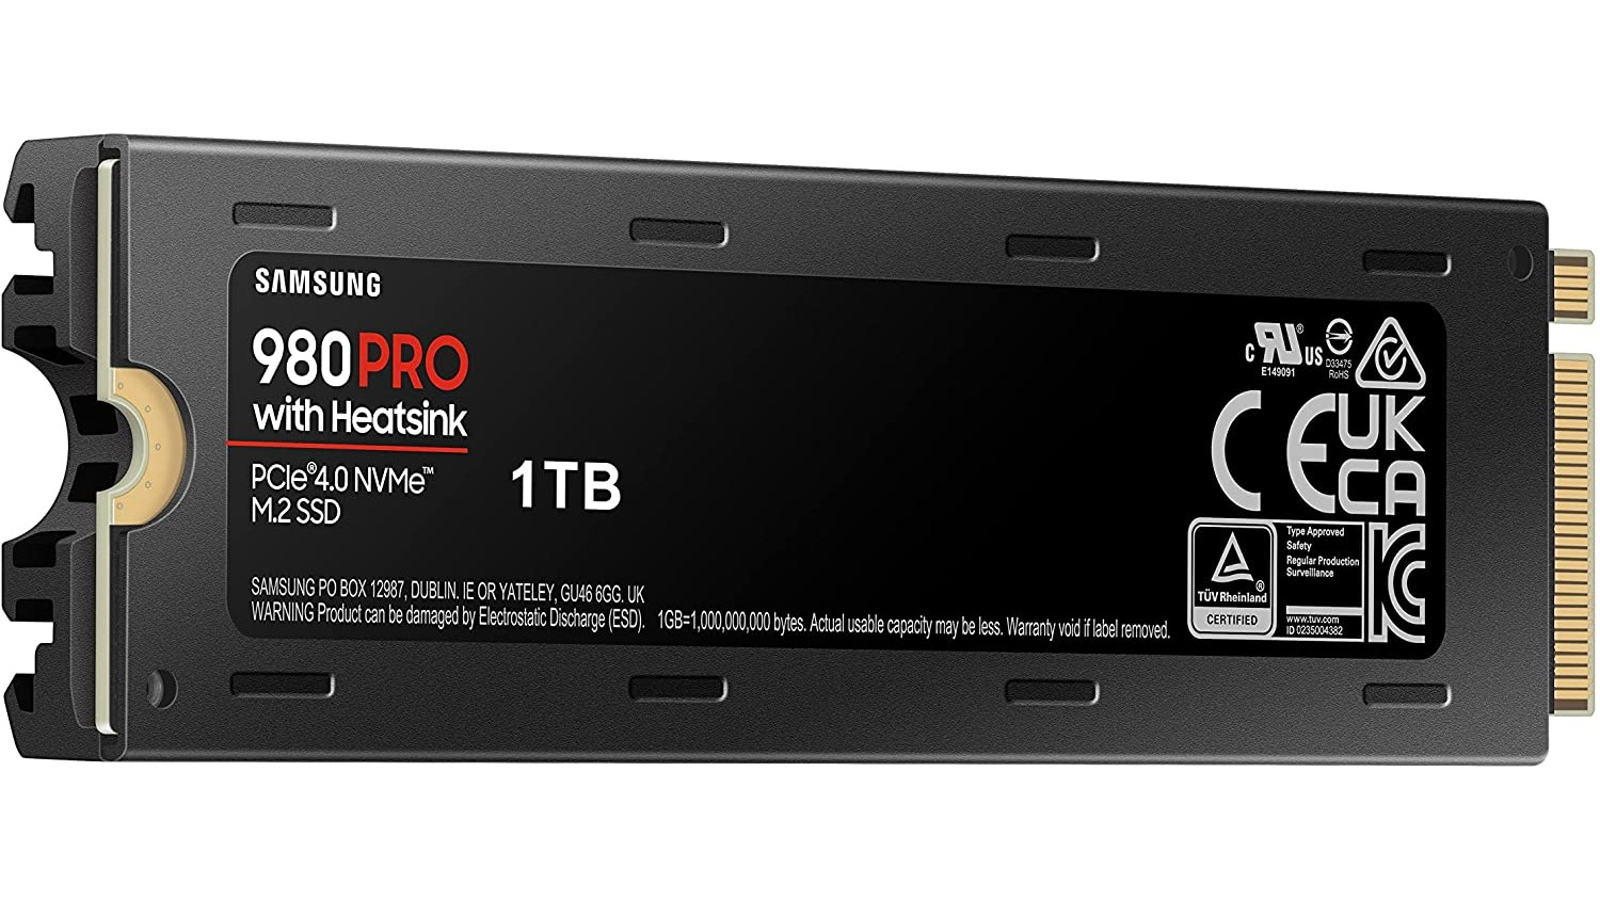 Get a 1TB Samsung 980 Pro PCIe 4.0 SSD for £120, £50 cheaper than it was  last month